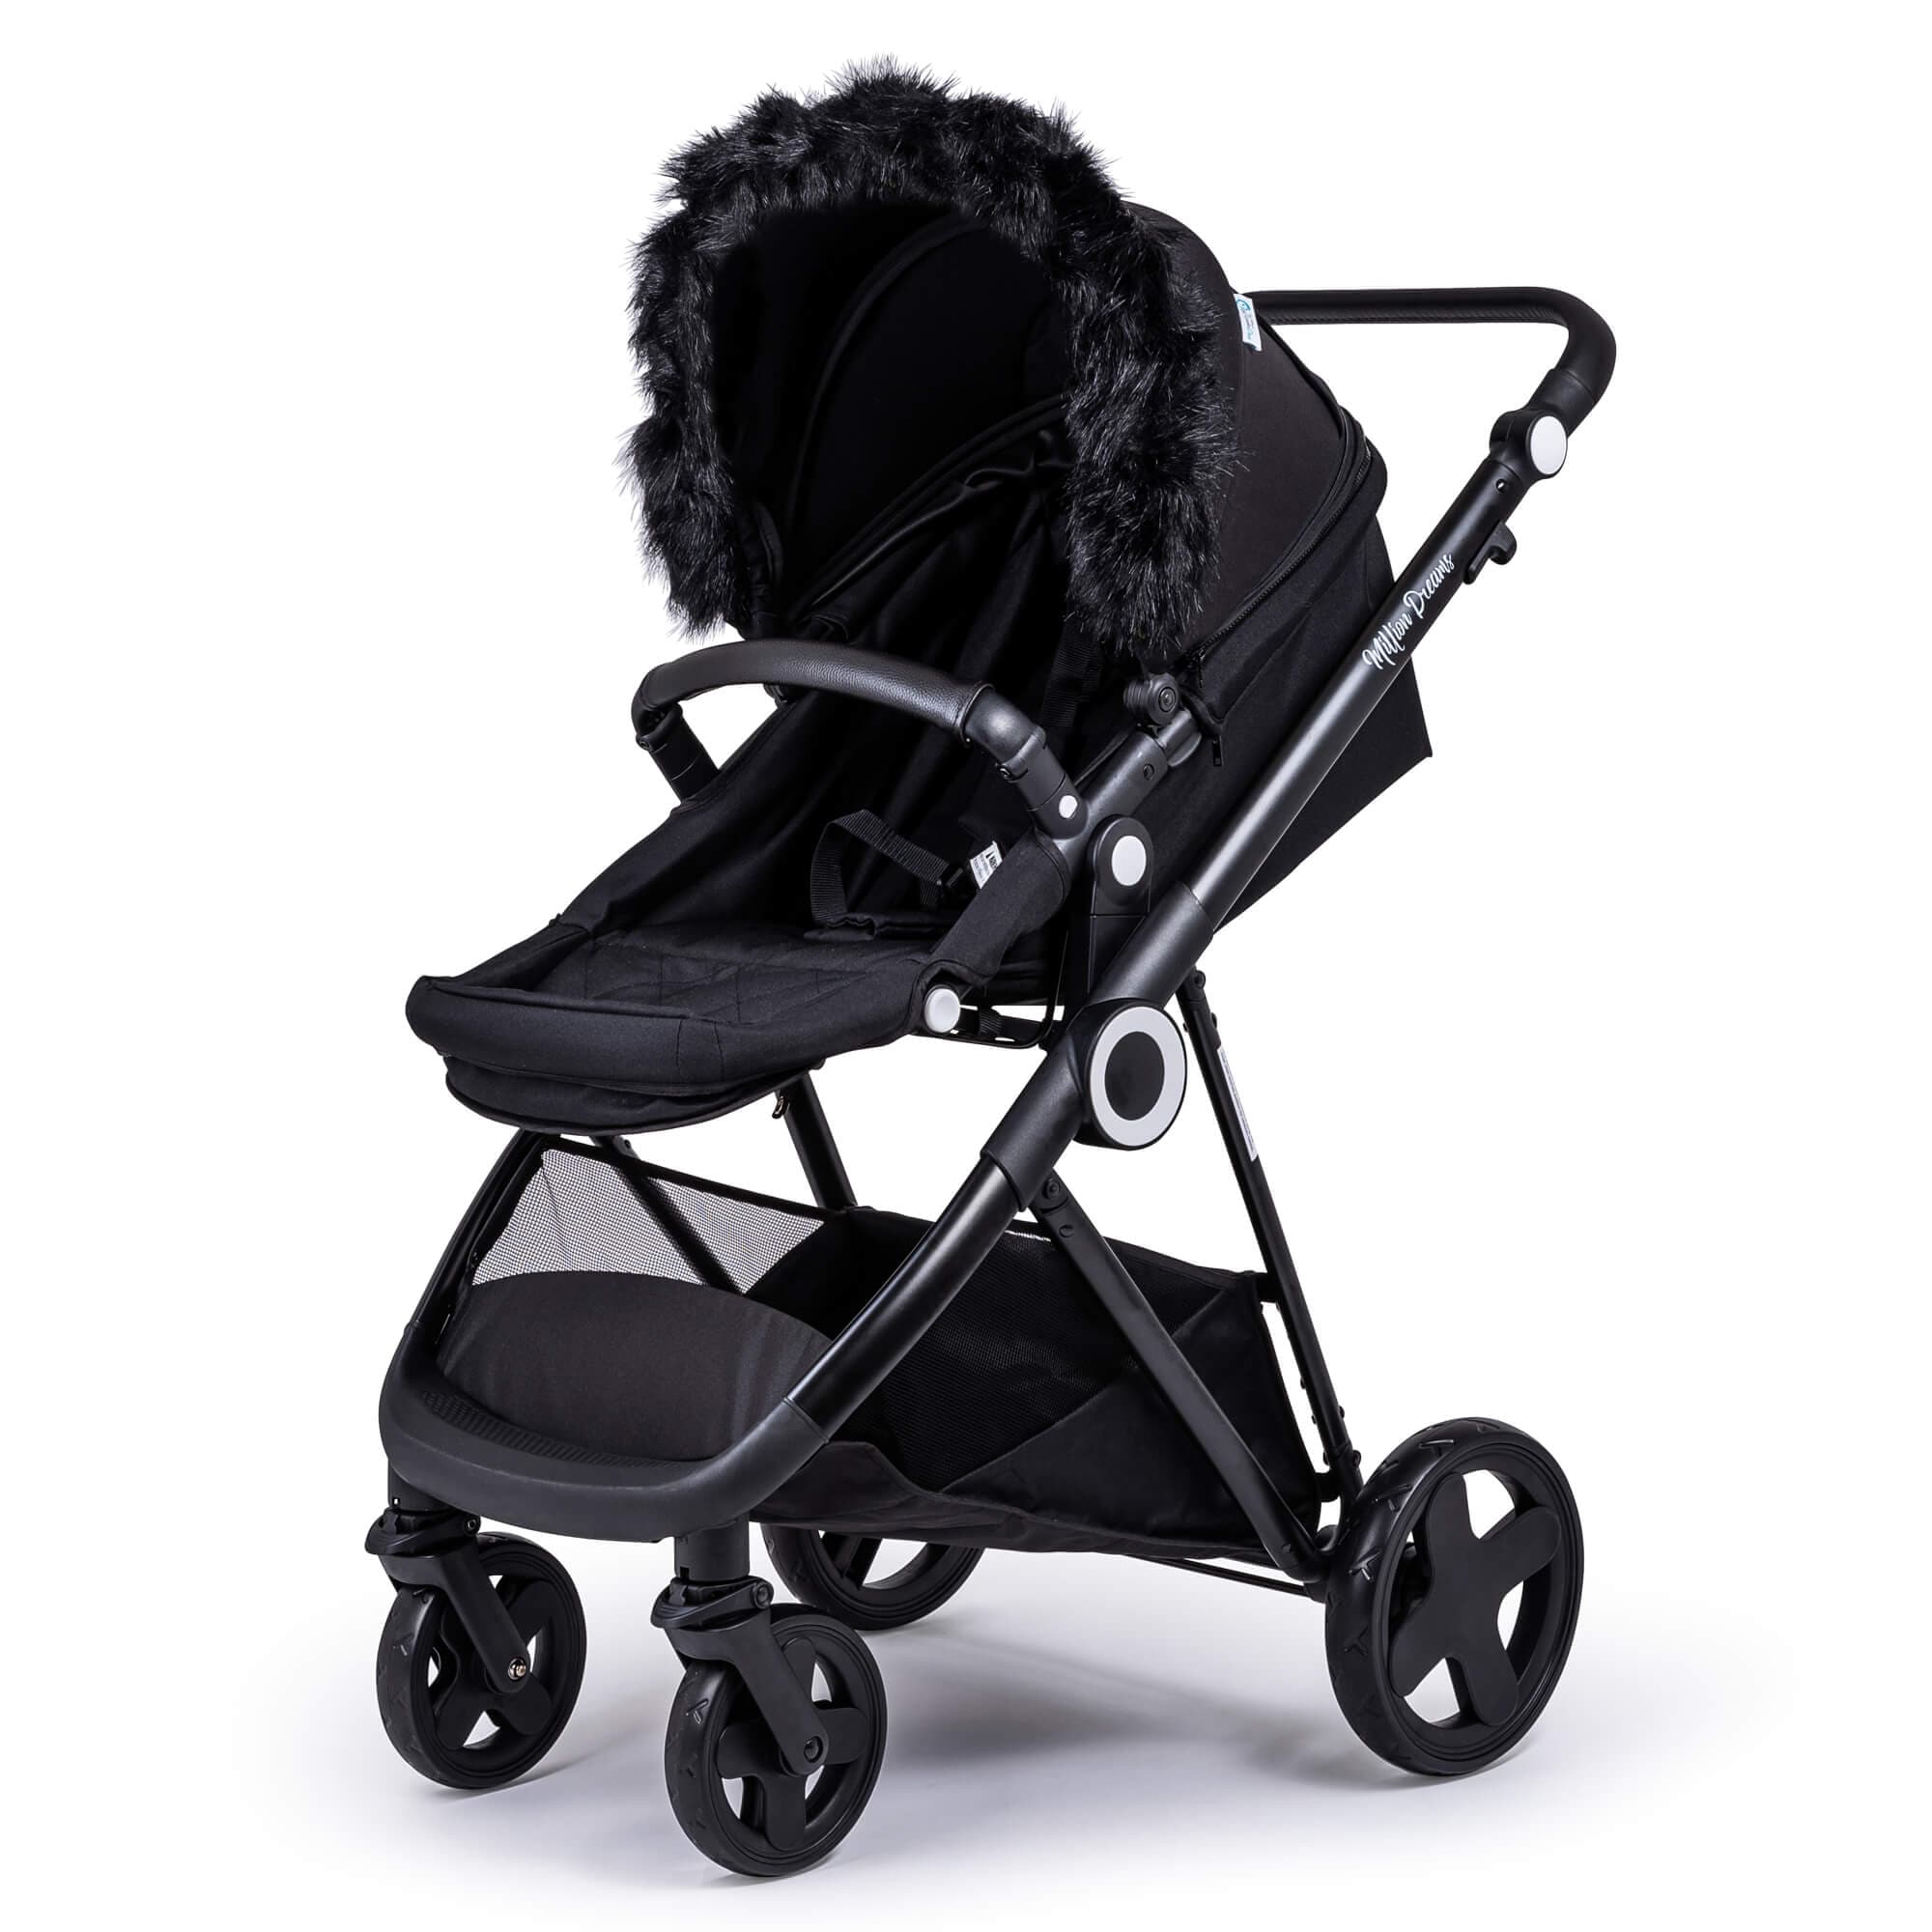 Pram Fur Hood Trim Attachment for Pushchair Compatible with Mothercare - Black / Fits All Models | For Your Little One